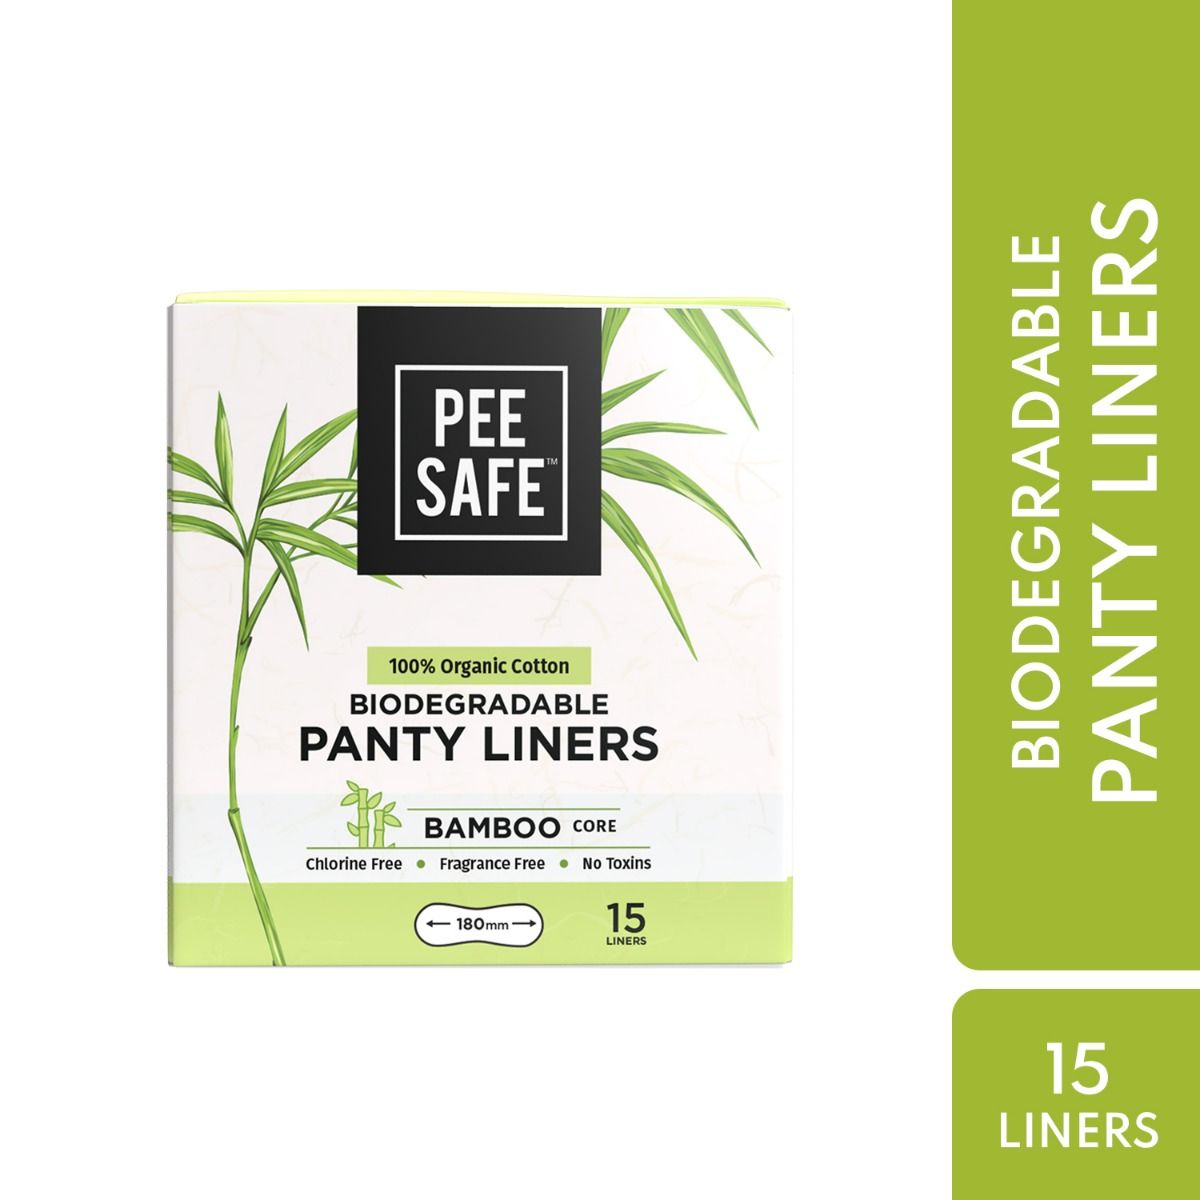 Pee Safe 100% Organic Cotton Biodegradable Panty Liners, 15 Count, Pack of 1 